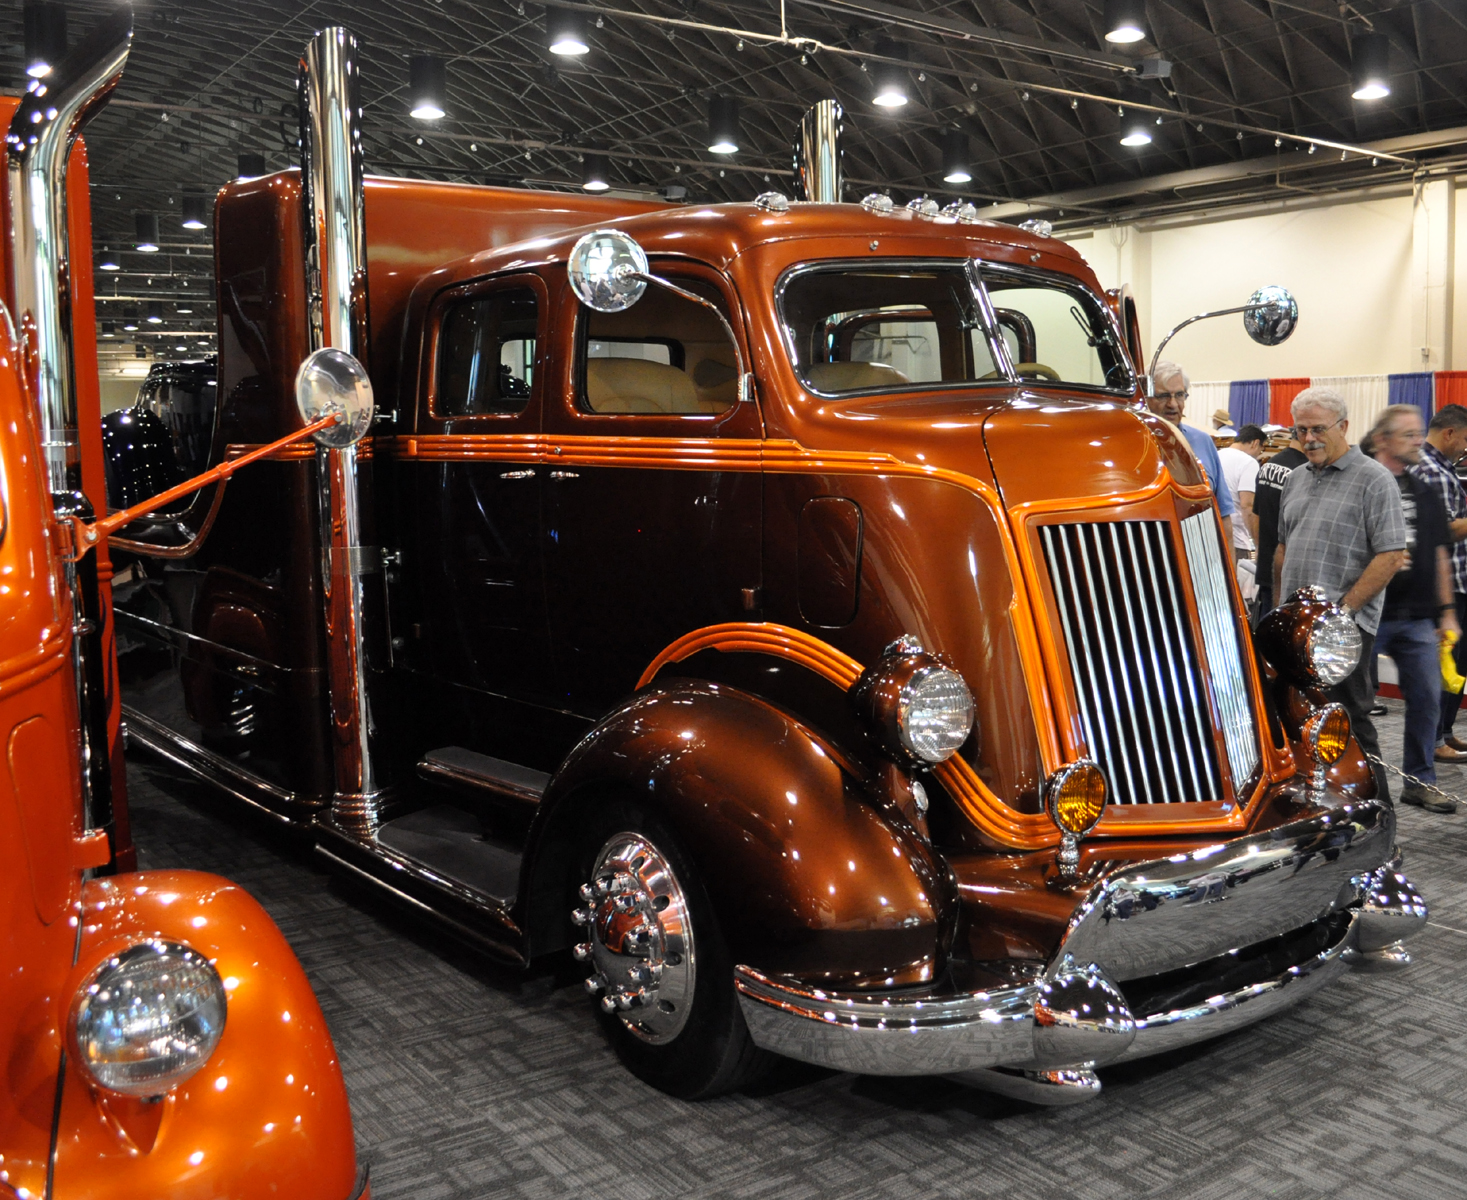 Just a car guy : The cool hot rod haulers were teamed up in a display ...